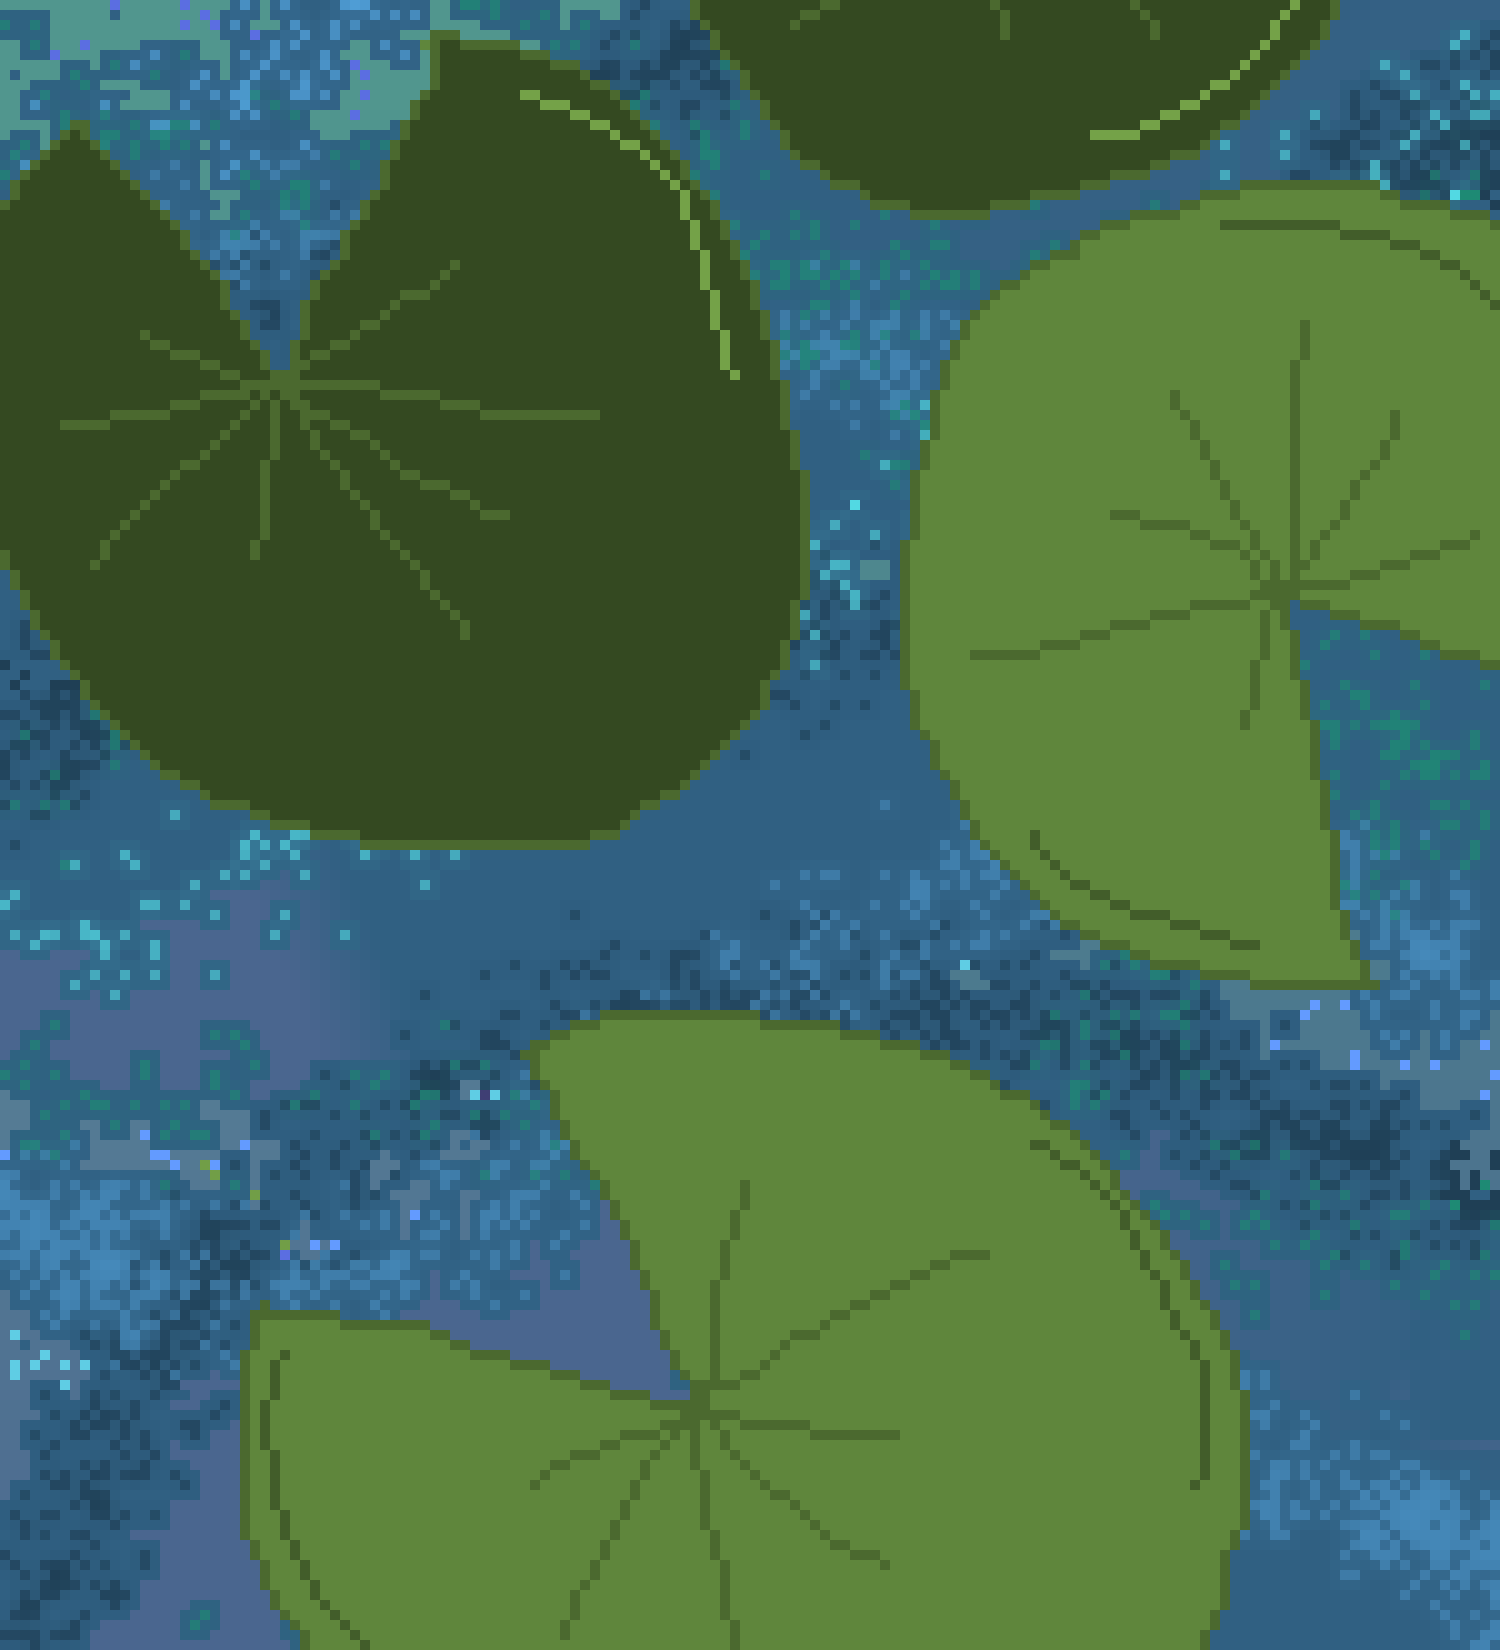 A 128 bit rendition of a closeup of a blue-green pond where three lilypads of varying shades of green are visible.